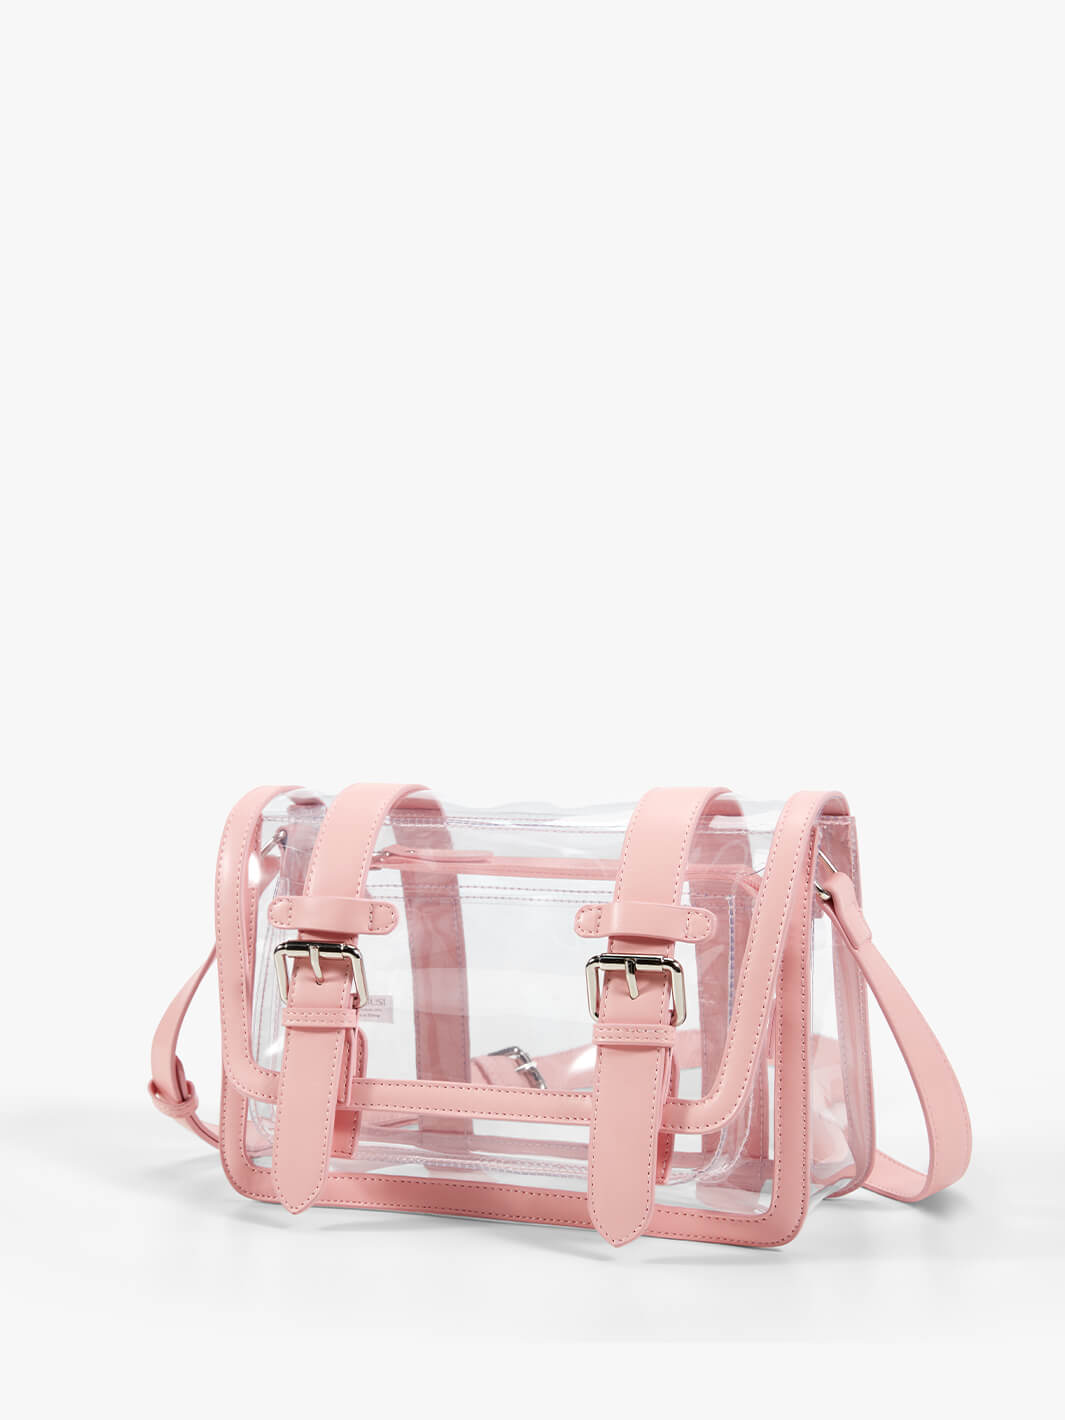 Clear Crossbody Bags for Women with Flap Design